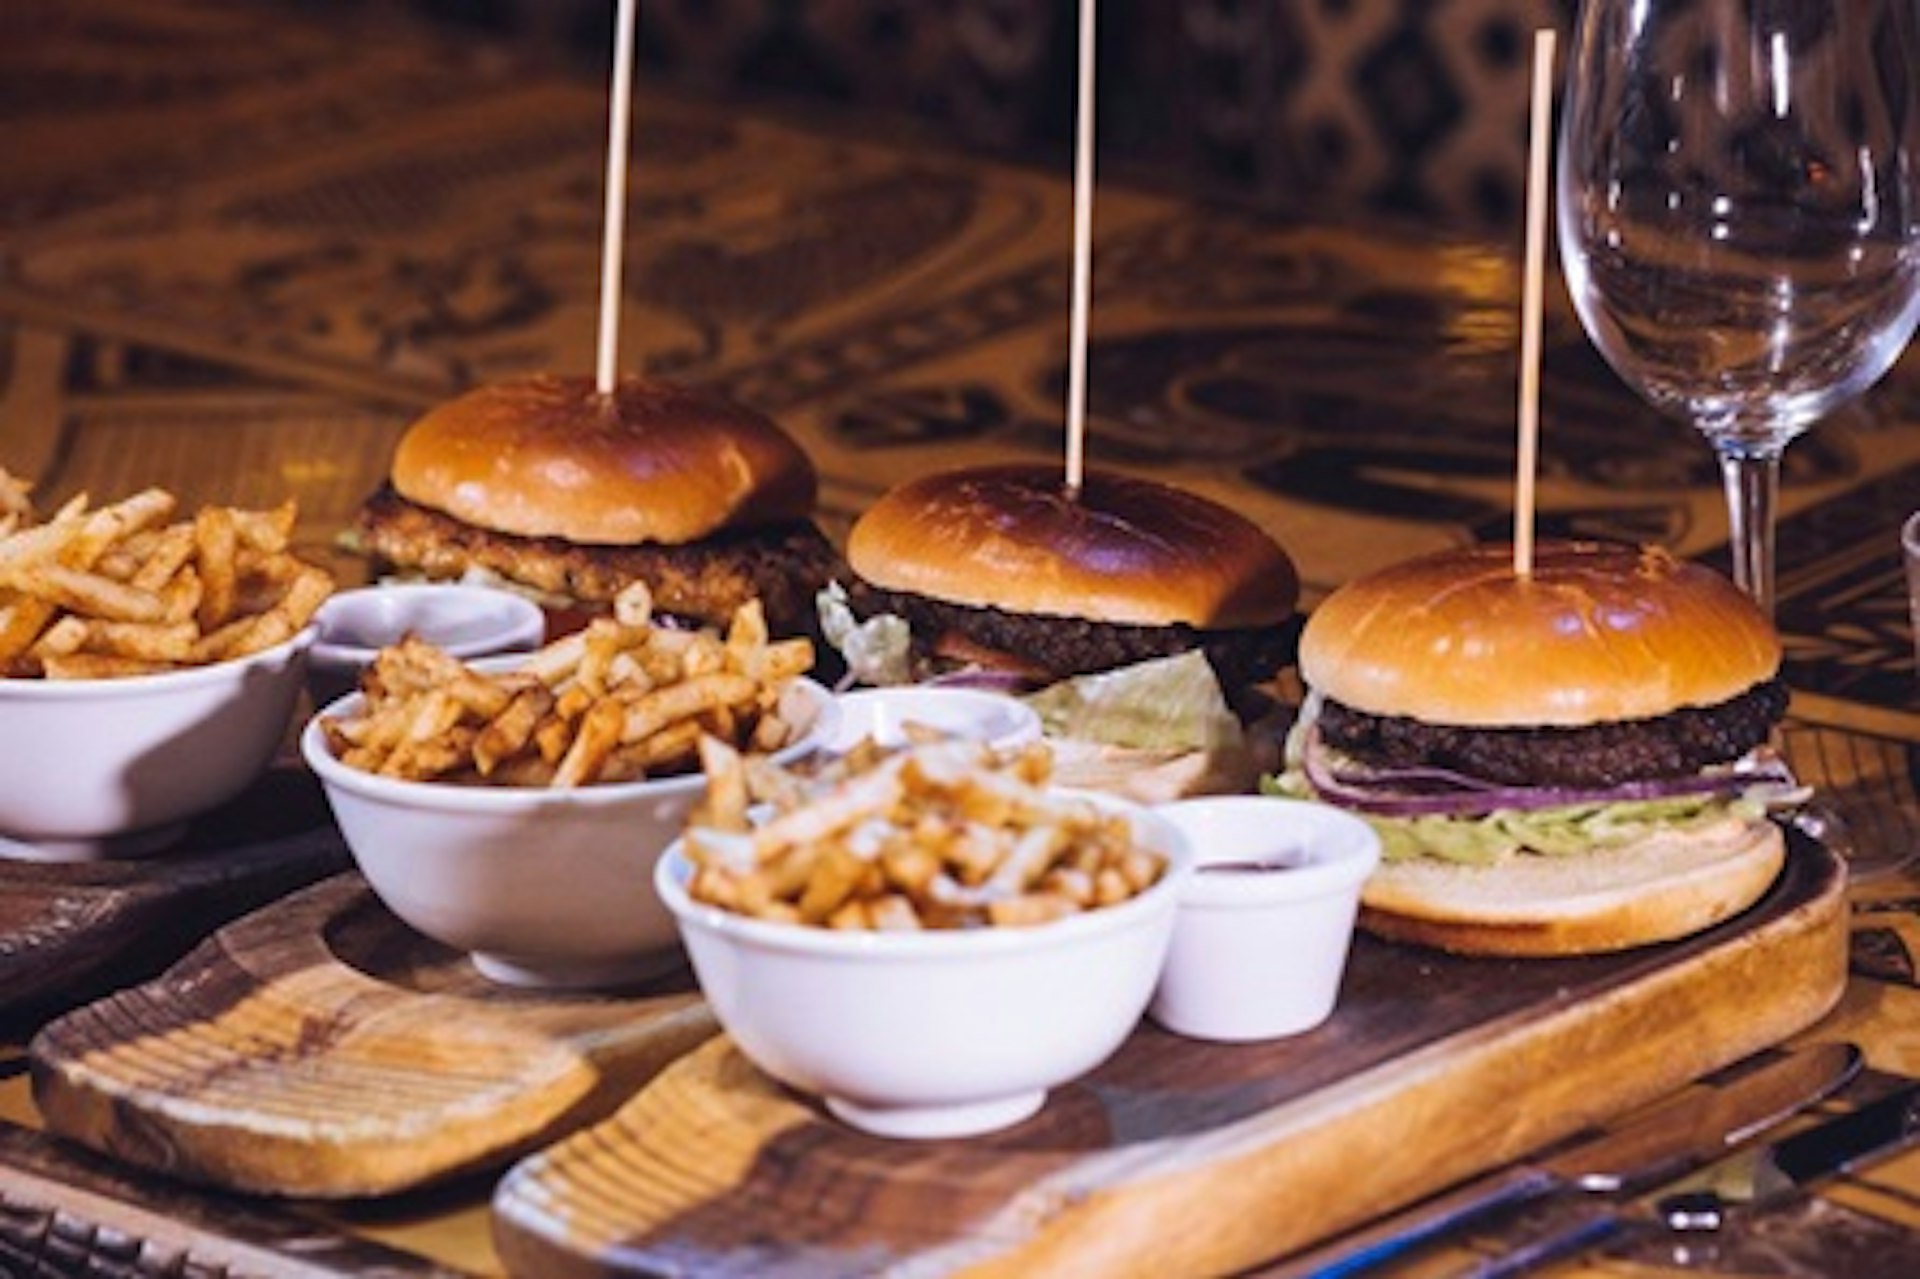 Burger, Fries and Cocktail for Two at London's Shaka Zulu 4